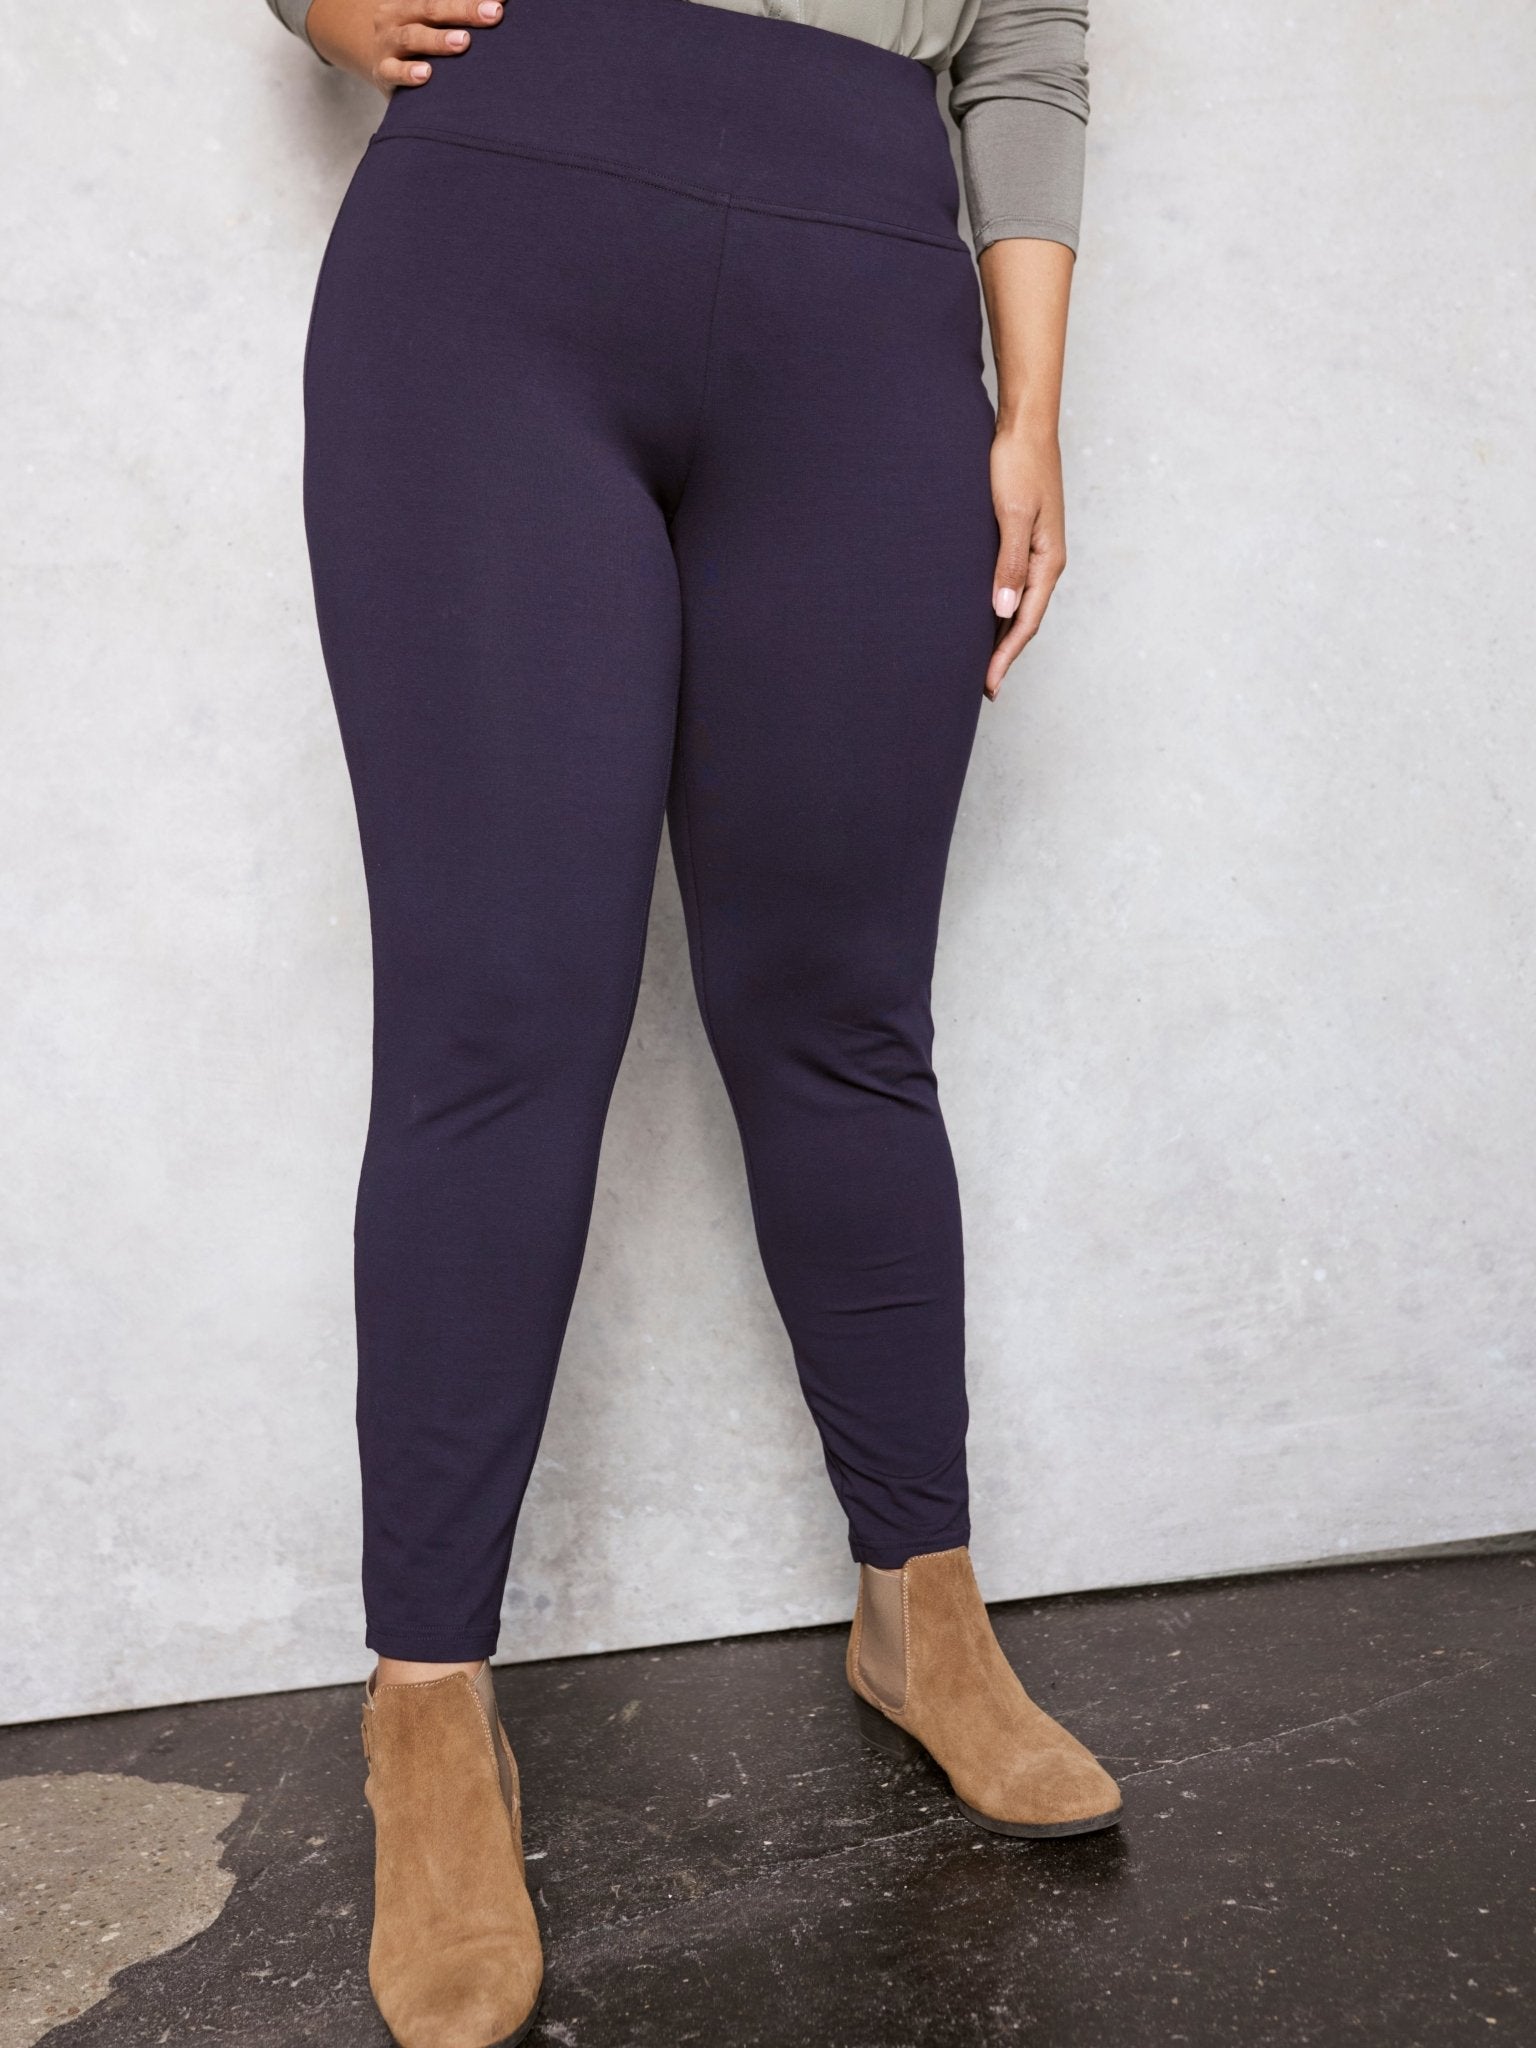 B91xZ Plus Size Leggings Tummy Control Stretch Cotton Blend Ankle Leggings  with Side Pockets,GY2 XL